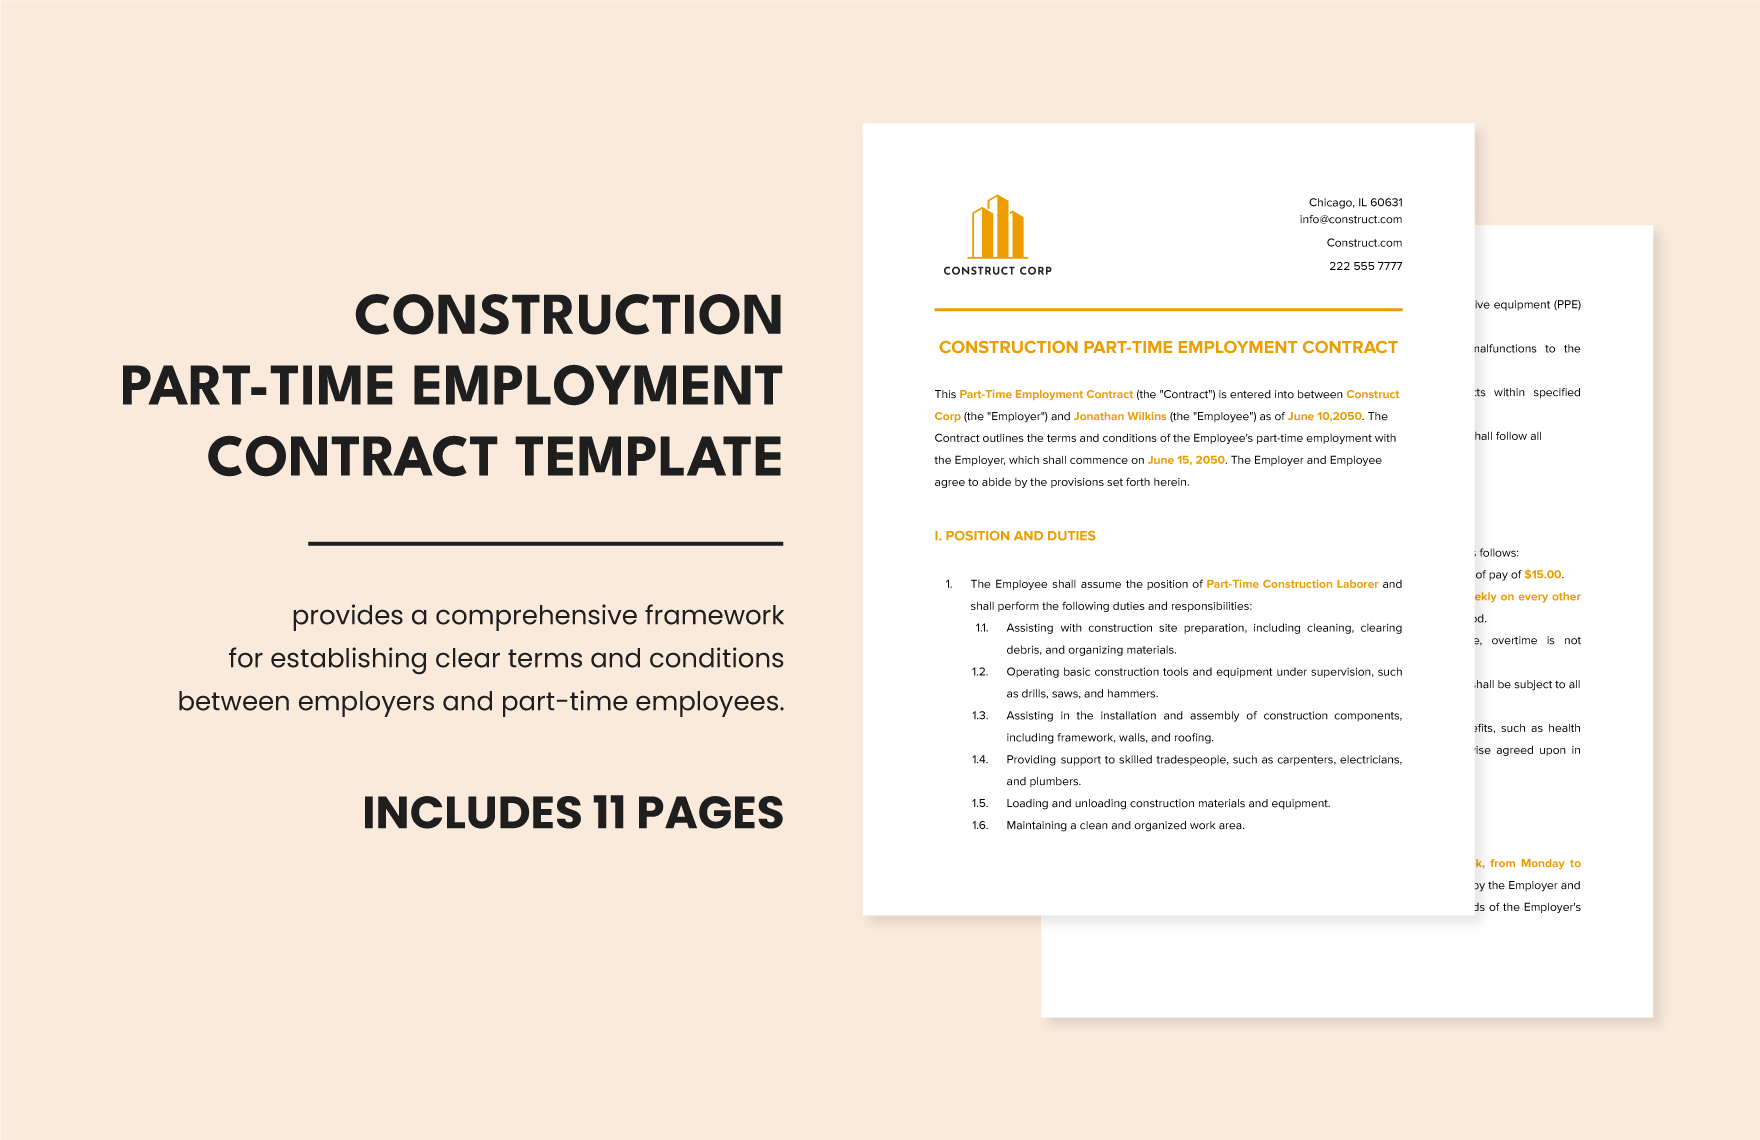 Construction Part-Time Employment Contract Template